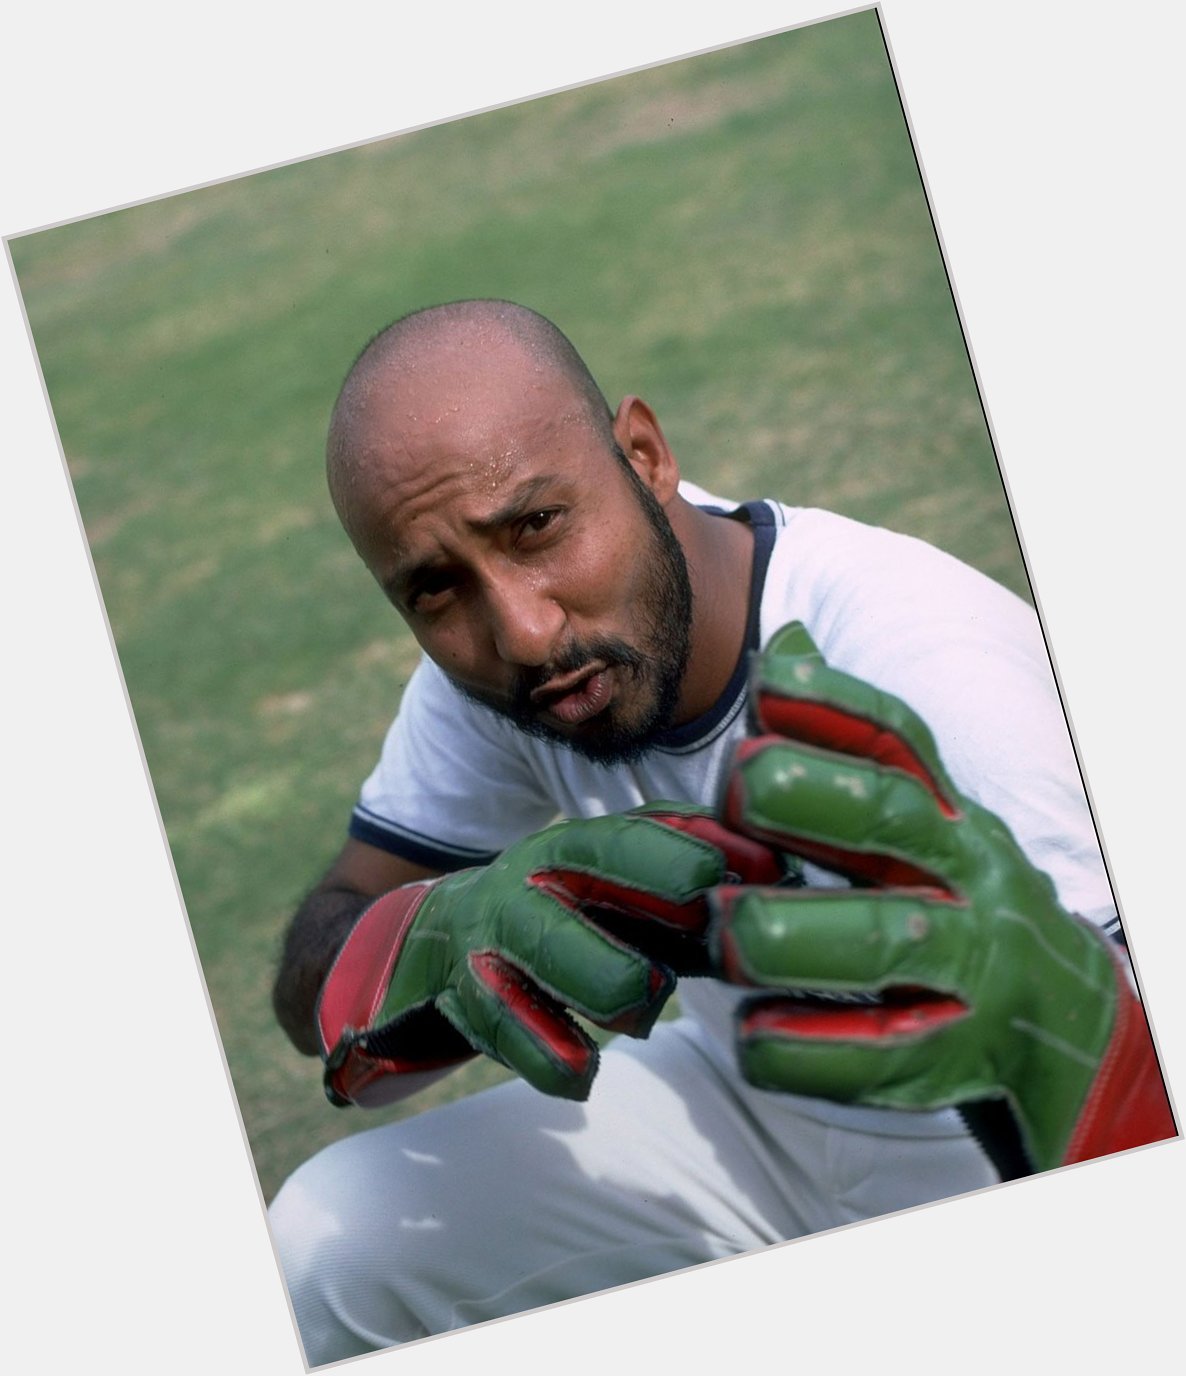  Happy birthday to Syed Kirmani, one of India\s finest wicketkeepers!

 